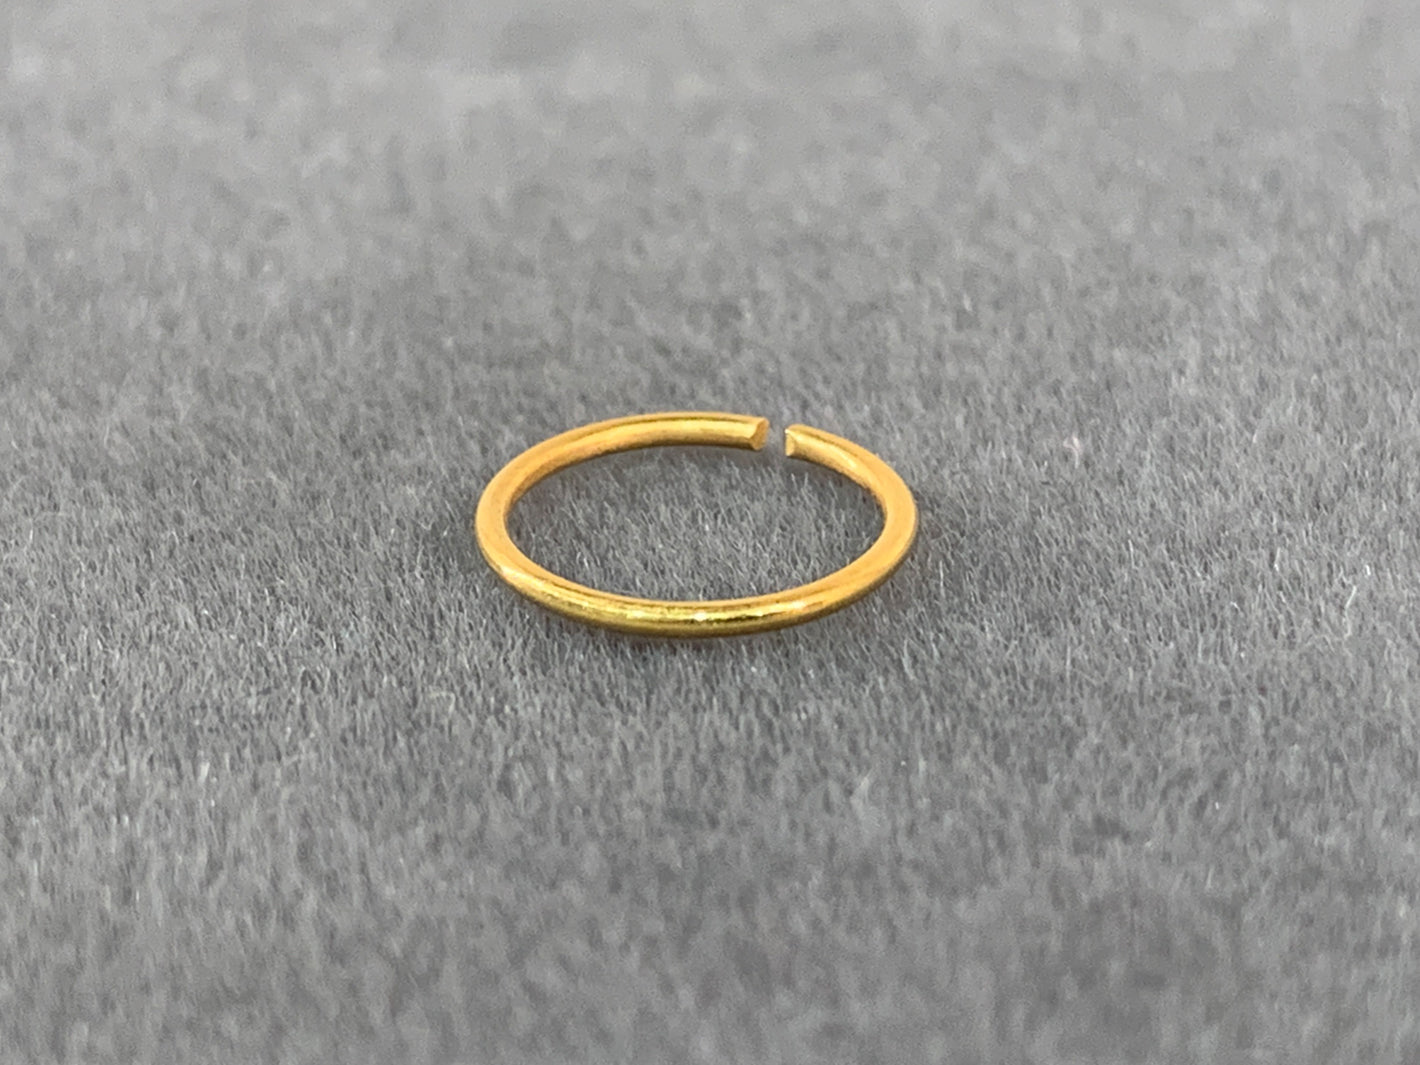 Amazon.com: Double Hoop Nose Ring Single Pierced 22g-Gold Nose Ring Piercing-Spiral  Nose Ring-Single Pierce Double Hoop (Right Side, 10) : Handmade Products